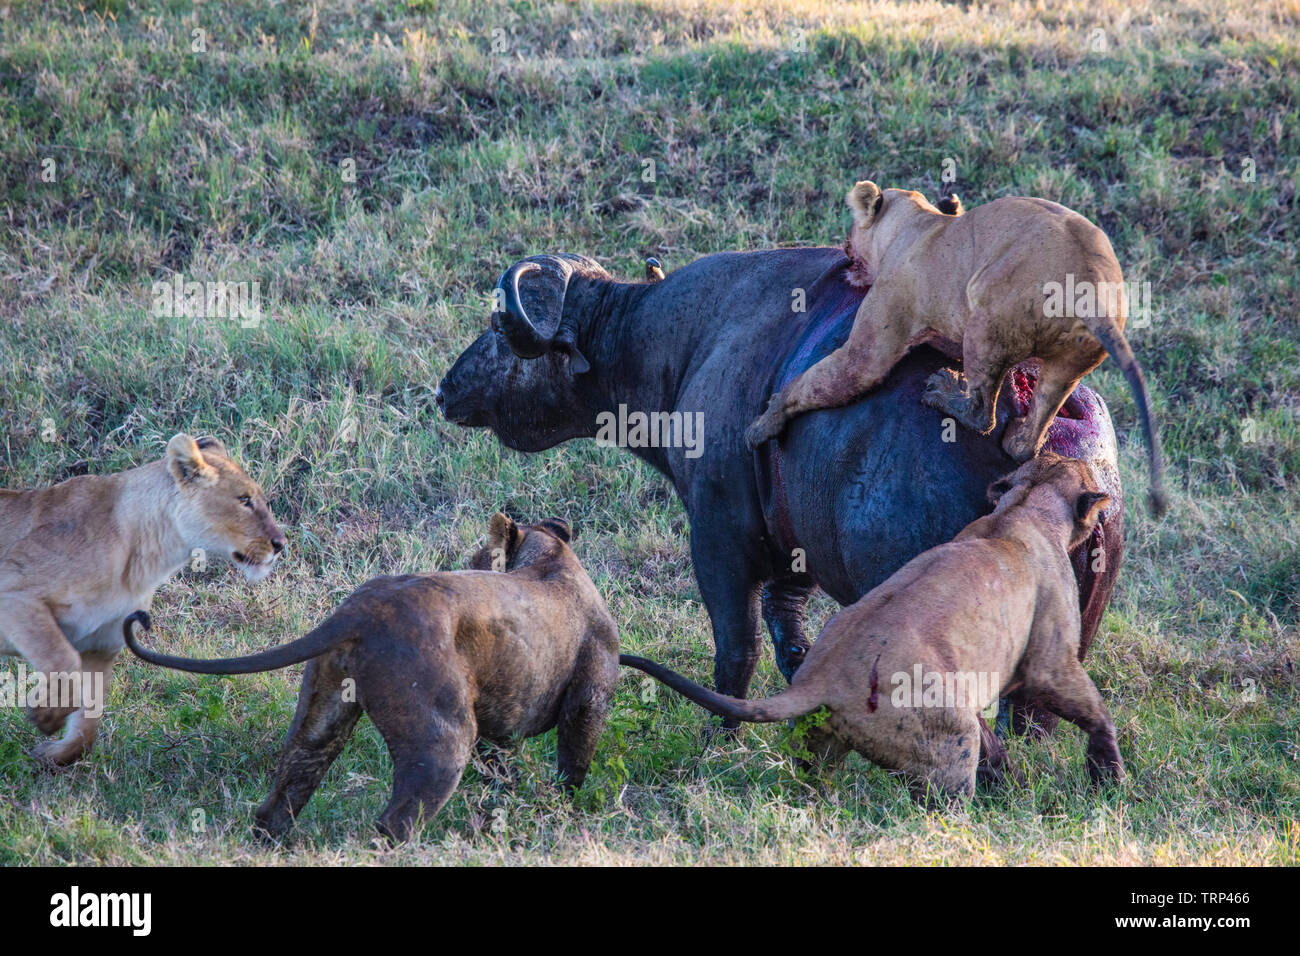 Lionesses, part of a pride, take down a cape Buffalo in Ngorongoro Crater,  Tanzania. Hunting cooperativelly. Often lions are killed by cape buffalo  while trying to take down and kill this dangerous